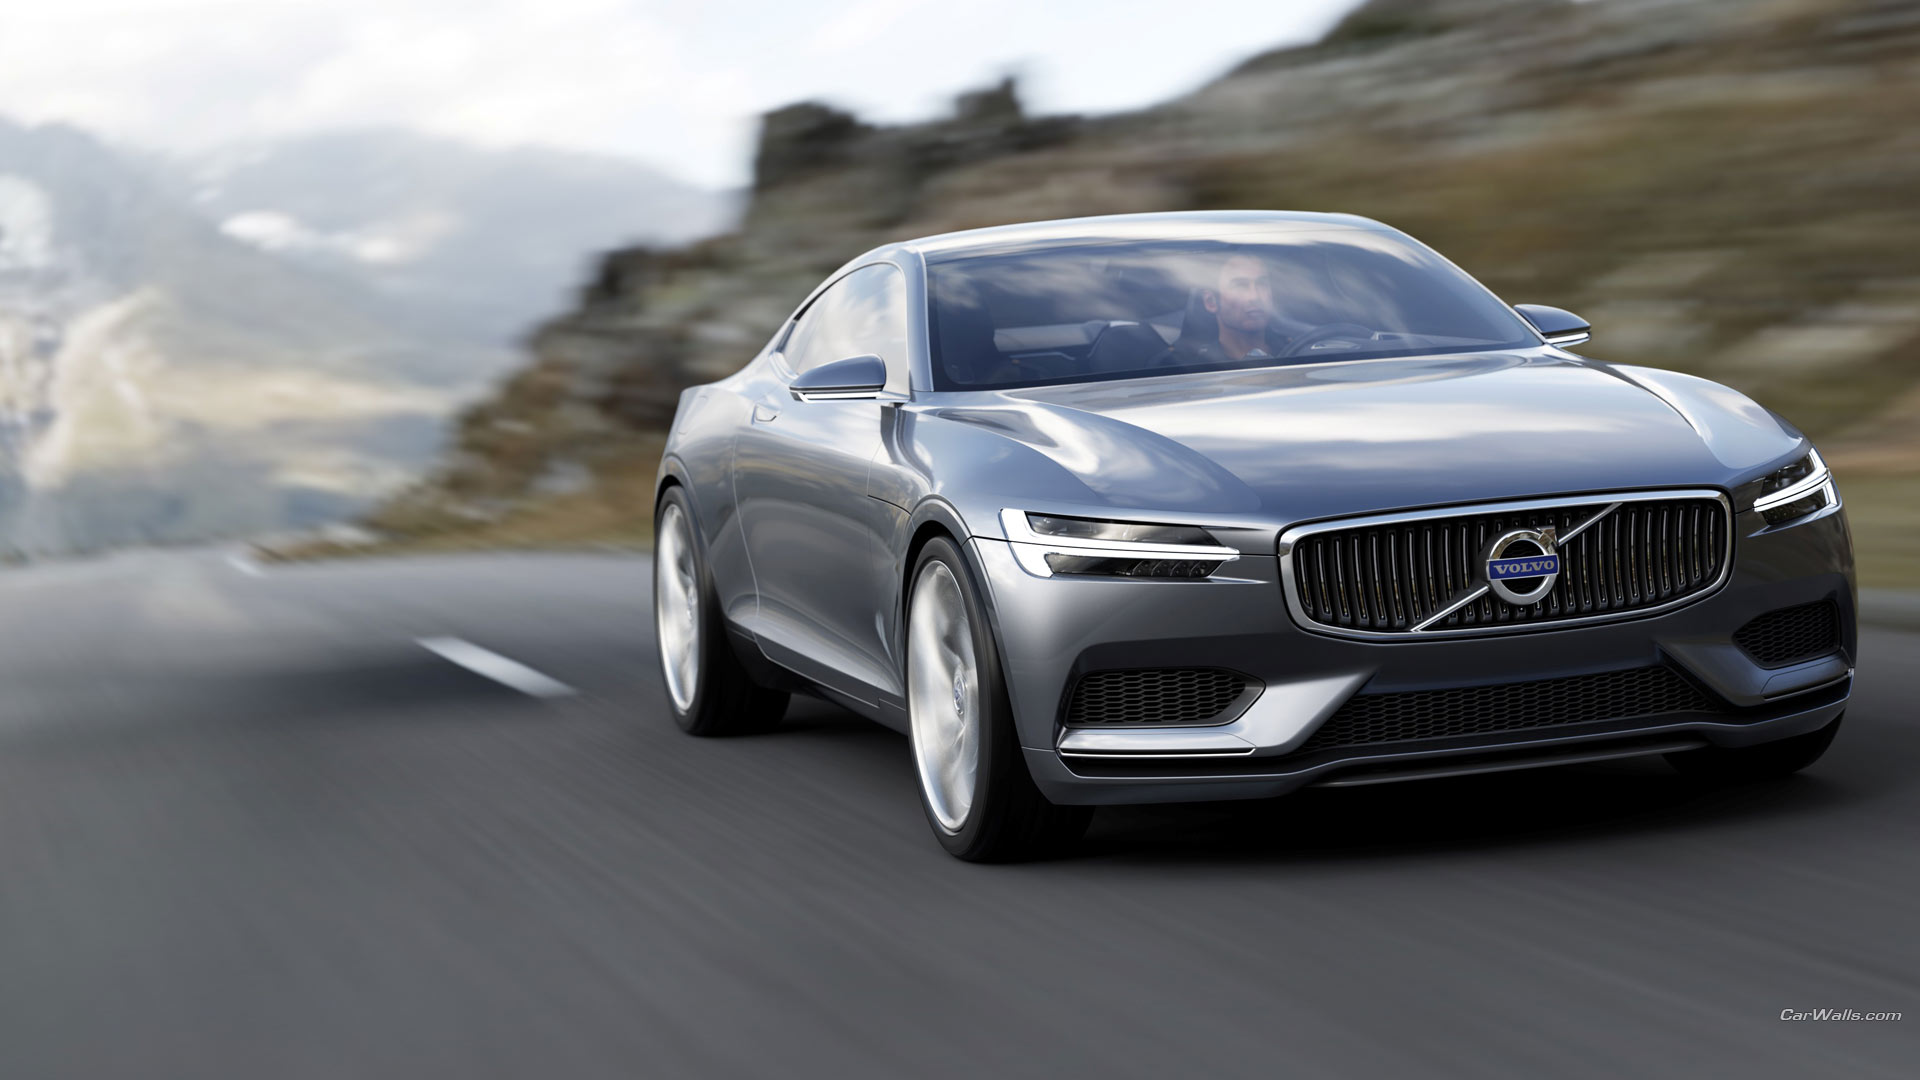 2013 Volvo Coupe Concept Wallpapers